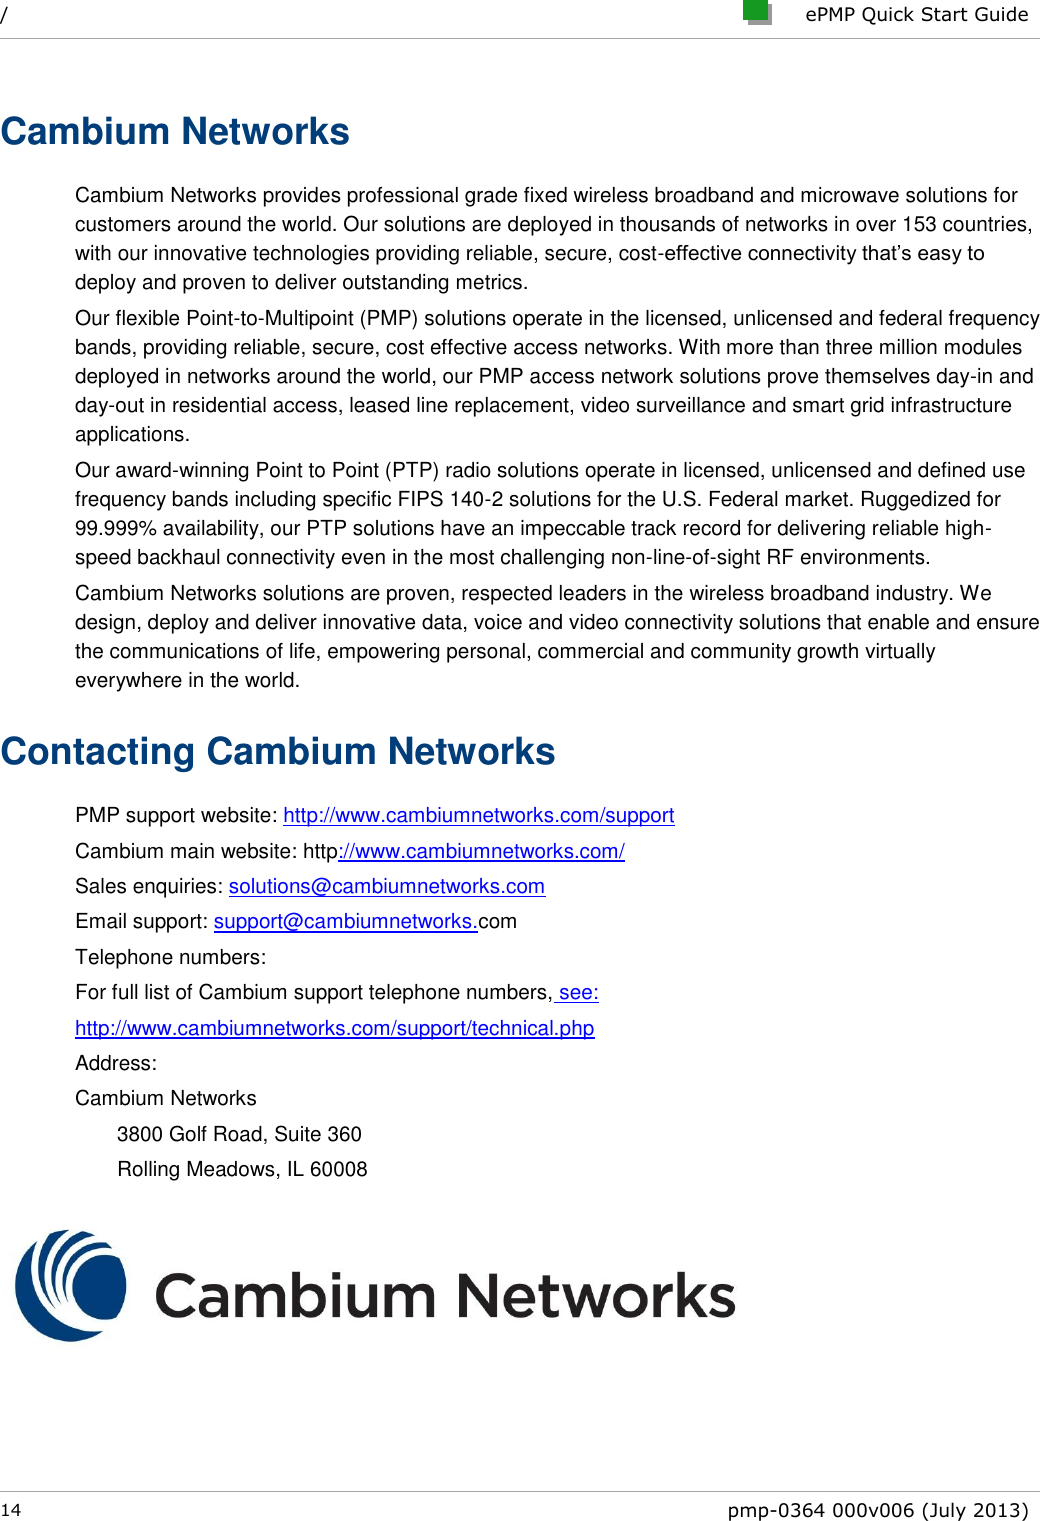 /     ePMP Quick Start Guide  14  pmp-0364 000v006 (July 2013)  Cambium Networks Cambium Networks provides professional grade fixed wireless broadband and microwave solutions for customers around the world. Our solutions are deployed in thousands of networks in over 153 countries, with our innovative technologies providing reliable, secure, cost-effective connectivity that’s easy to deploy and proven to deliver outstanding metrics. Our flexible Point-to-Multipoint (PMP) solutions operate in the licensed, unlicensed and federal frequency bands, providing reliable, secure, cost effective access networks. With more than three million modules deployed in networks around the world, our PMP access network solutions prove themselves day-in and day-out in residential access, leased line replacement, video surveillance and smart grid infrastructure applications. Our award-winning Point to Point (PTP) radio solutions operate in licensed, unlicensed and defined use frequency bands including specific FIPS 140-2 solutions for the U.S. Federal market. Ruggedized for 99.999% availability, our PTP solutions have an impeccable track record for delivering reliable high-speed backhaul connectivity even in the most challenging non-line-of-sight RF environments. Cambium Networks solutions are proven, respected leaders in the wireless broadband industry. We design, deploy and deliver innovative data, voice and video connectivity solutions that enable and ensure the communications of life, empowering personal, commercial and community growth virtually everywhere in the world. Contacting Cambium Networks PMP support website: http://www.cambiumnetworks.com/support Cambium main website: http://www.cambiumnetworks.com/  Sales enquiries: solutions@cambiumnetworks.com Email support: support@cambiumnetworks.com Telephone numbers: For full list of Cambium support telephone numbers, see: http://www.cambiumnetworks.com/support/technical.php Address: Cambium Networks 3800 Golf Road, Suite 360 Rolling Meadows, IL 60008  